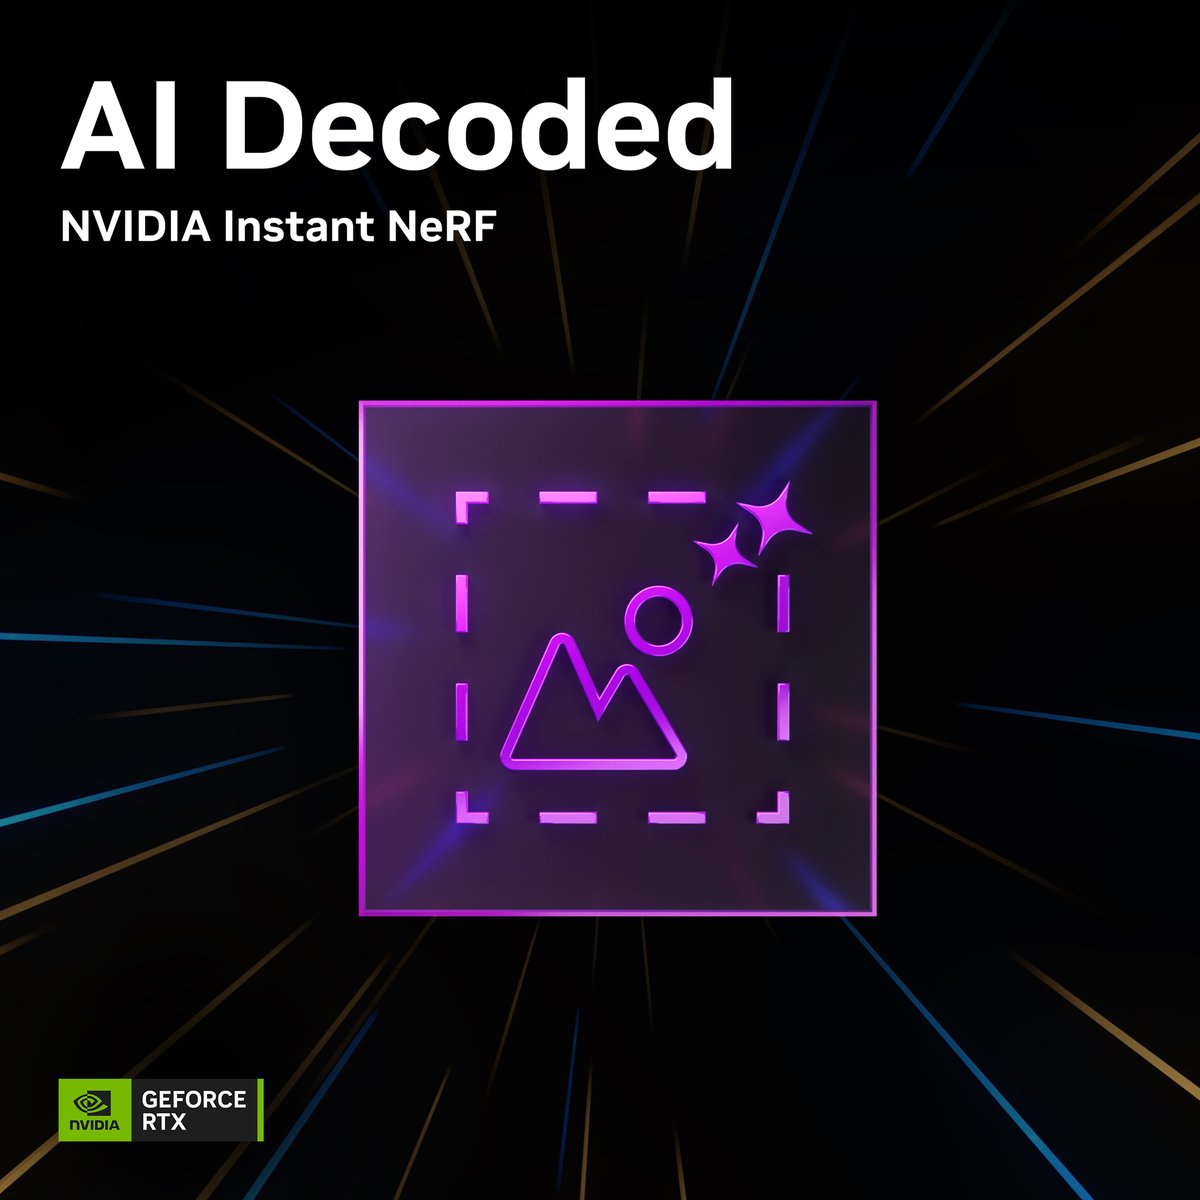 Turn your pictures into 3D scenes with #AIonRTX. 🖼️🌐
 
Using @NVIDIA #InstantNeRF technology, creatives are turning a collection of still images into a digital 3D environments in a matter of seconds.
 
Learn more in this week's #AIDecoded blog ➡️ blogs.nvidia.com/blog/ai-decode…